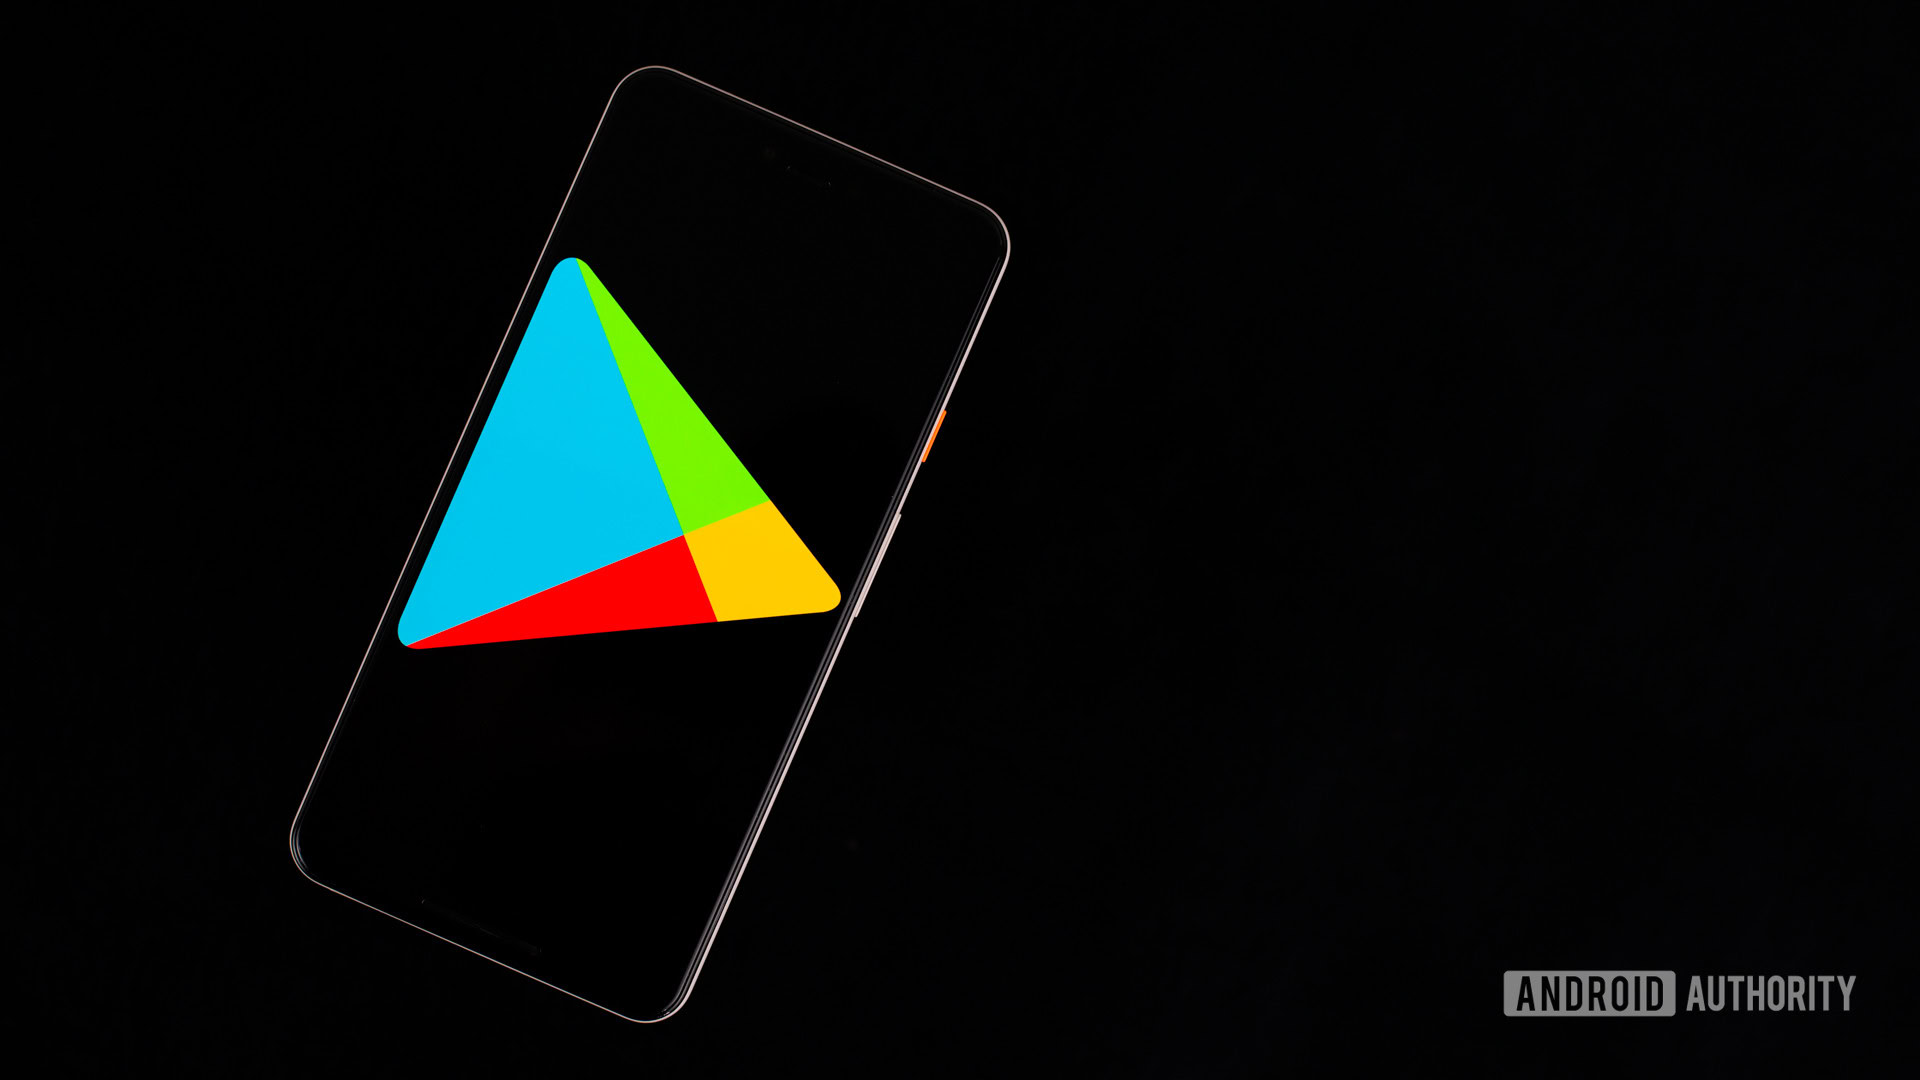 Google Play Store APK (Optimized App, Full Feature) for Android